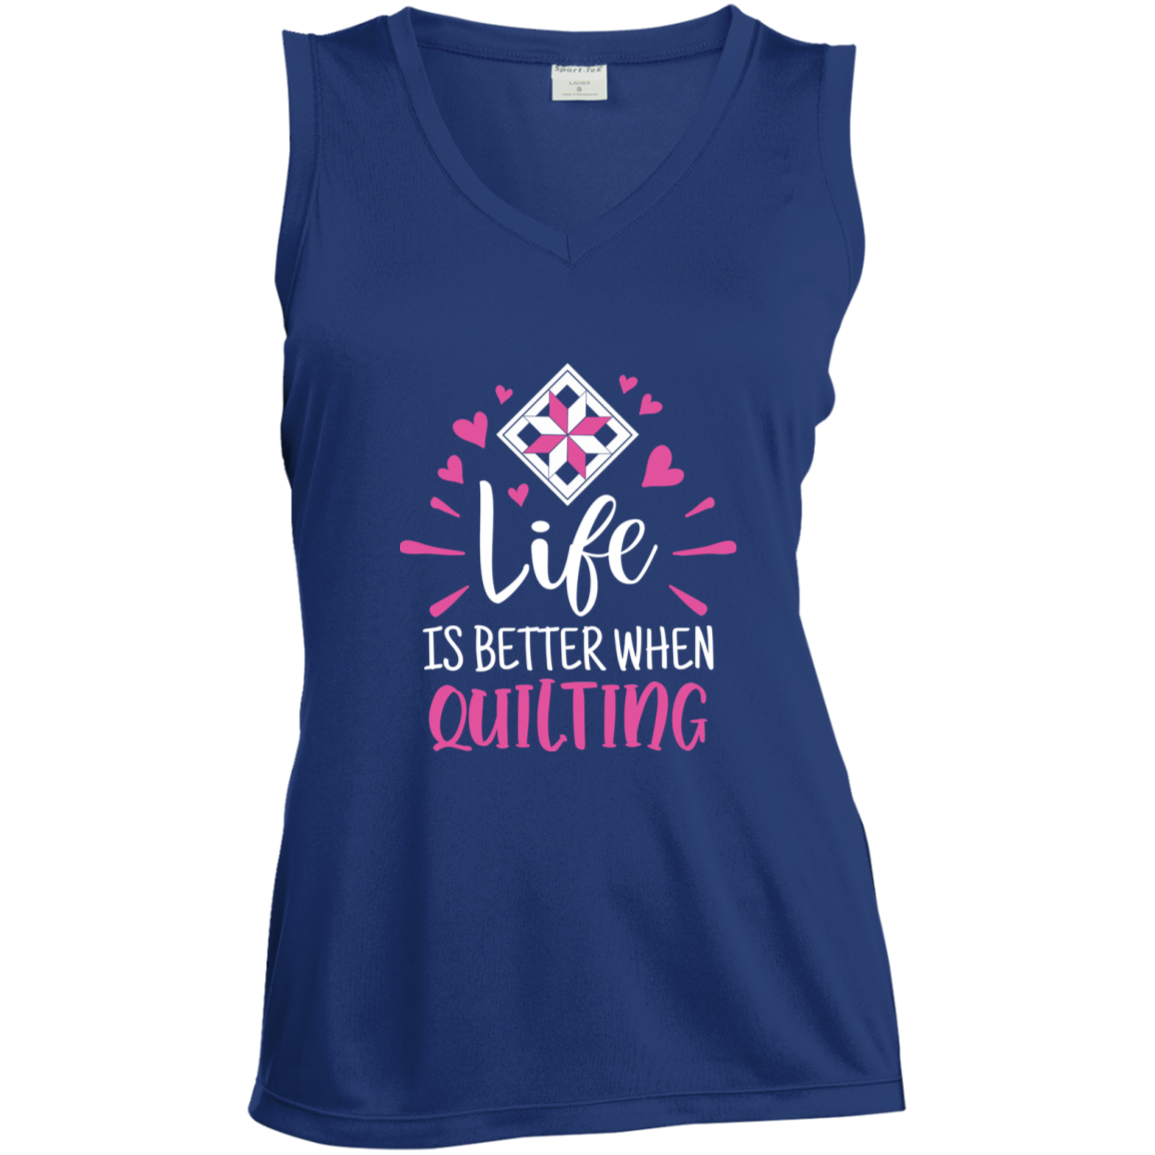 Life is Better When Quilting Ladies' Sleeveless Moisture Absorbing V-Neck